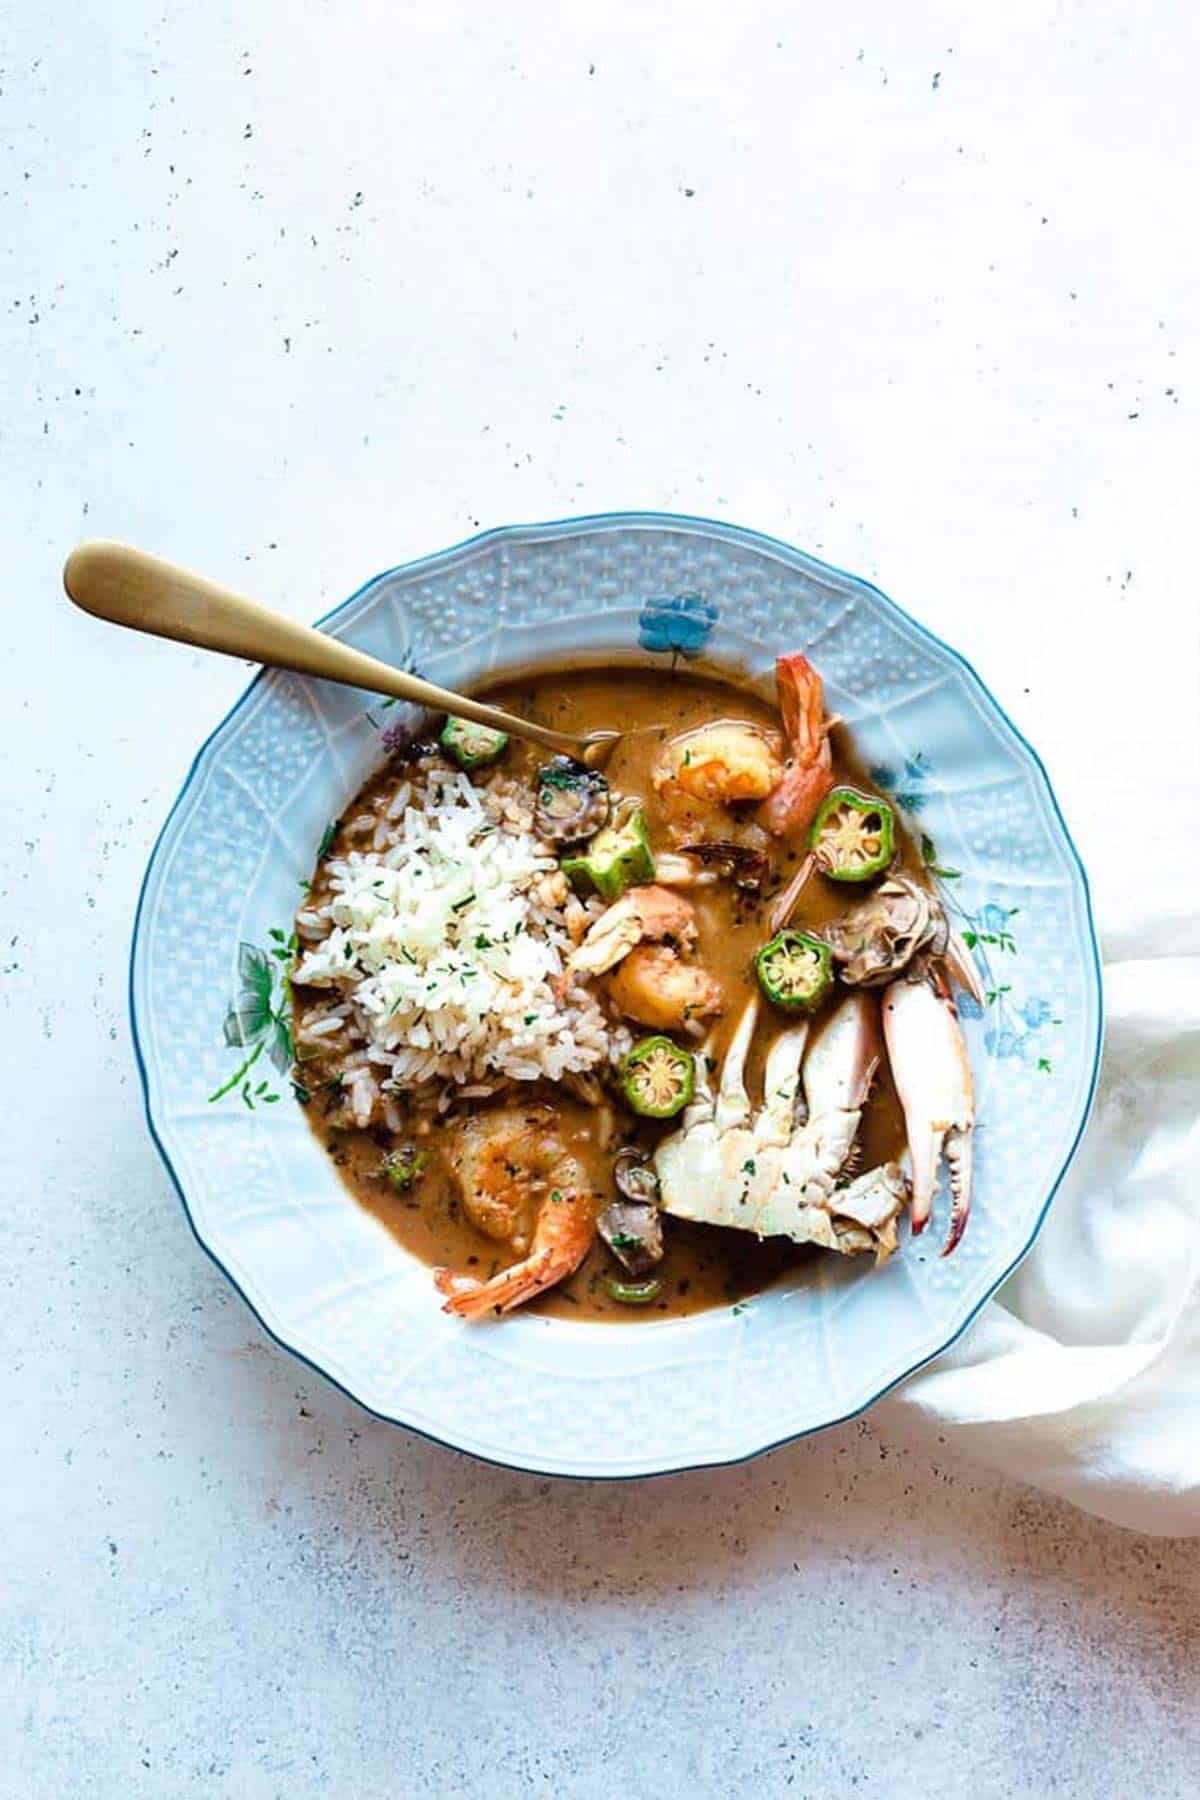 Bowl of seafood gumbo recipe over rice with spoon ready to serve.